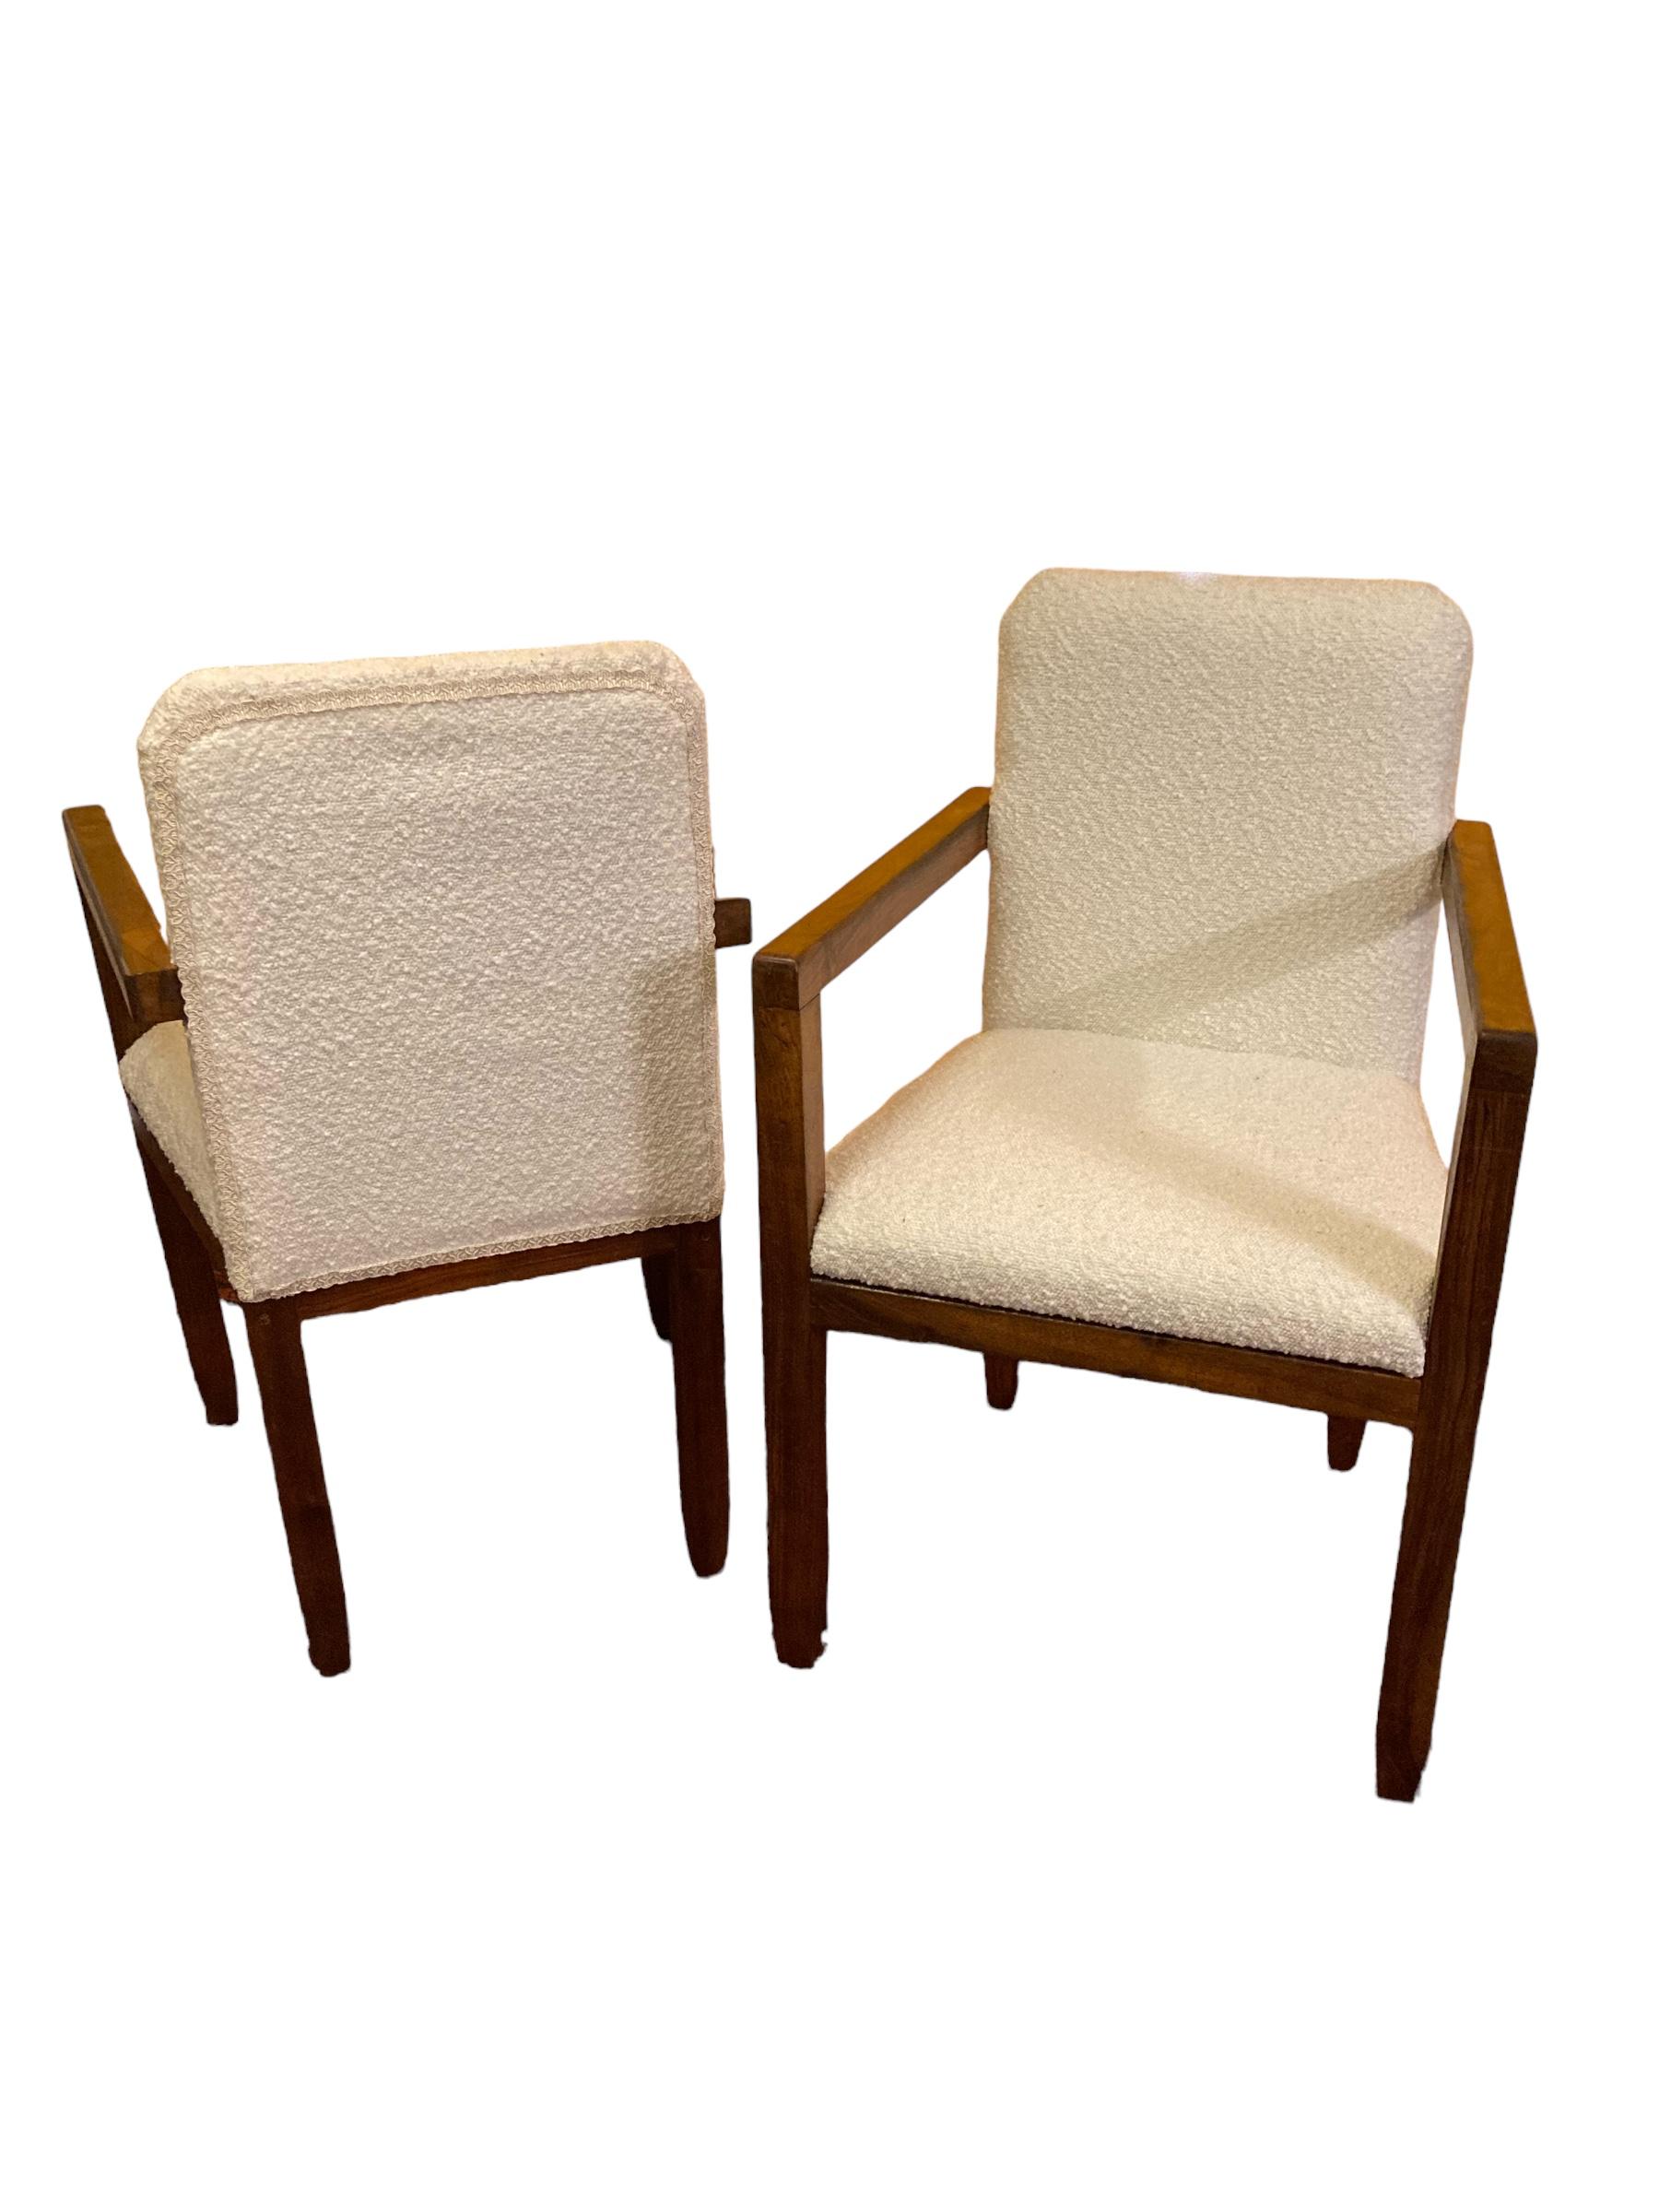 A Pair of Art Deco Mahogany framed Armchairs, White Boucle Upholstery 1920's For Sale 6